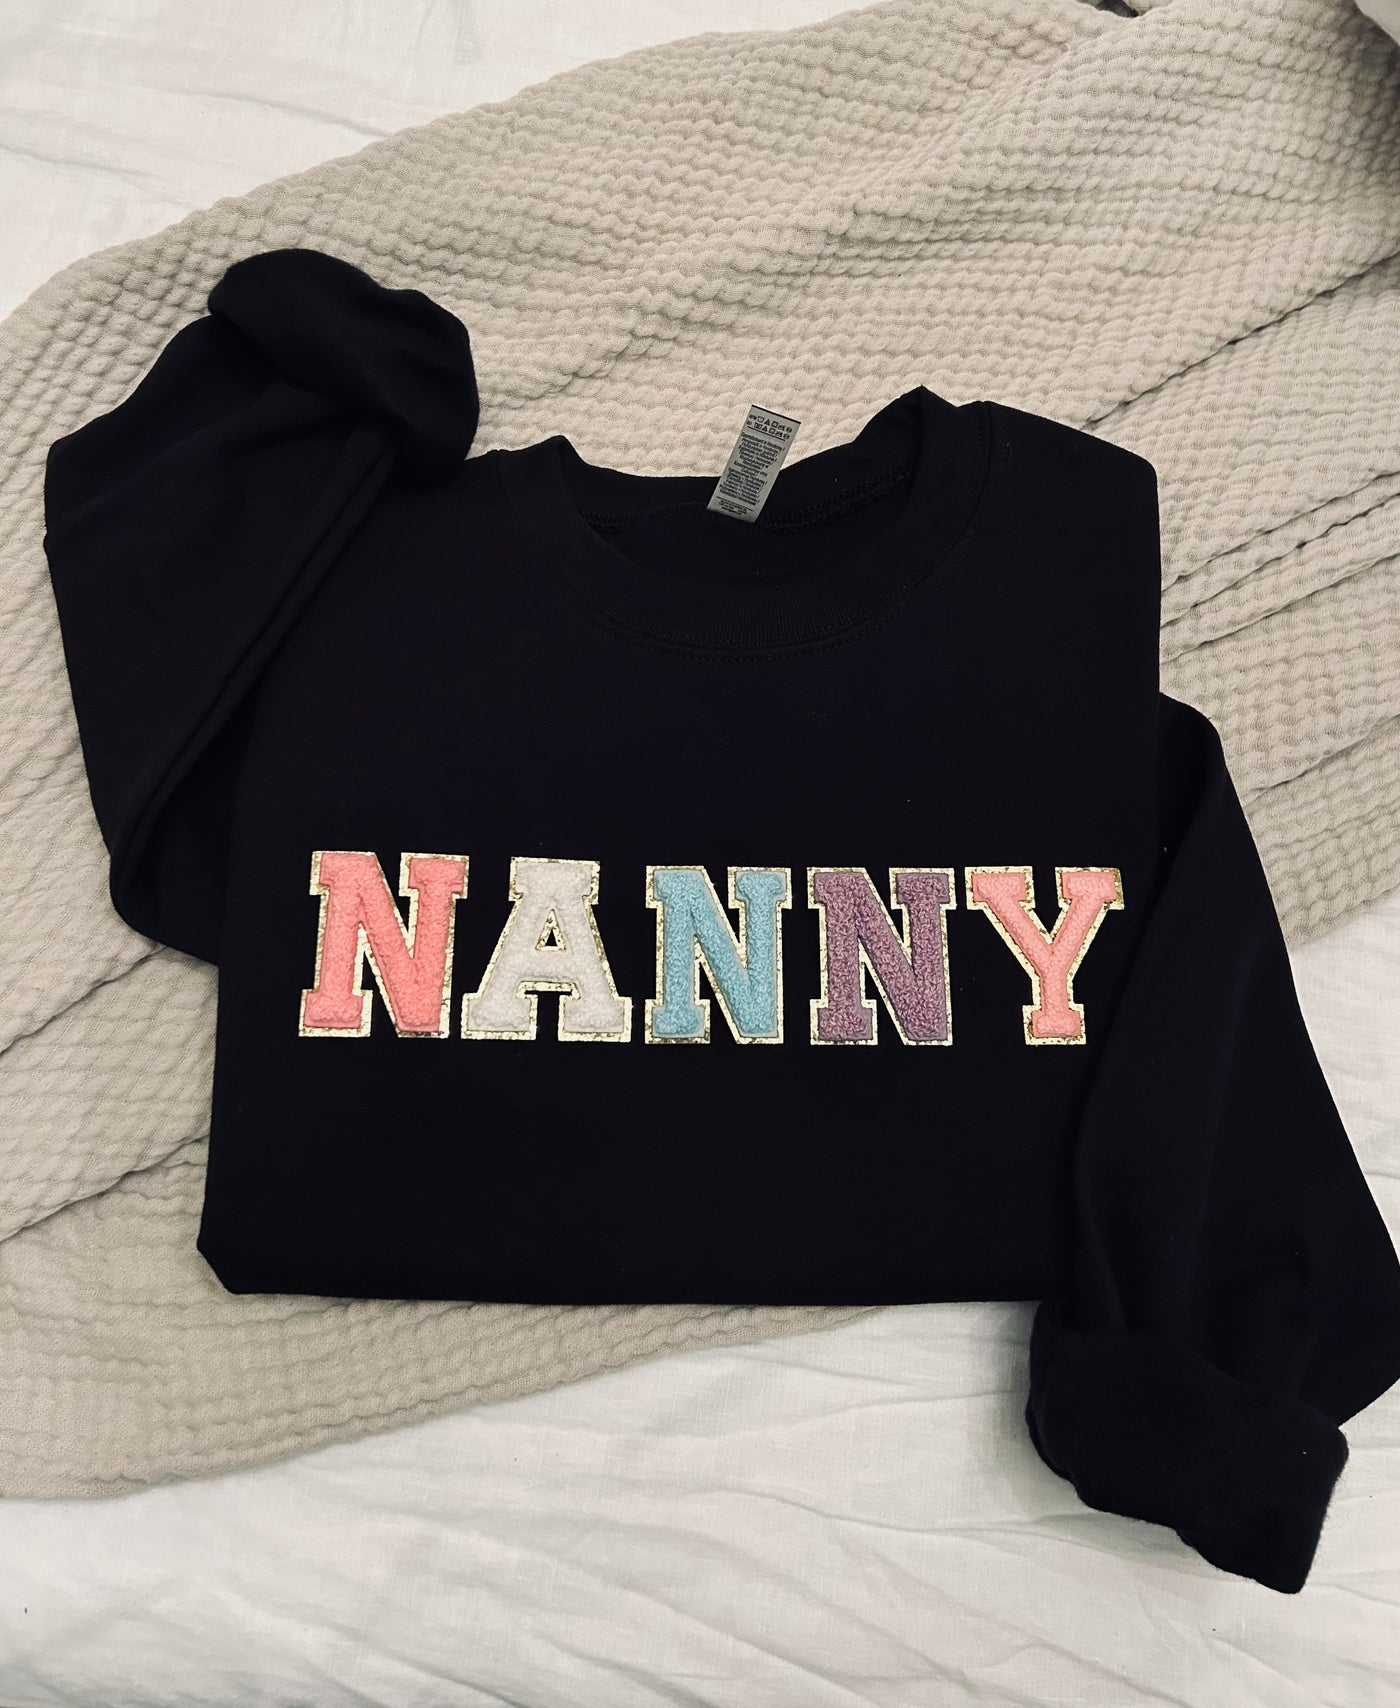 "NANNY" *PRE ORDER* (Expected Completion Early/Mid June) Chenille Patch Unisex Crewneck